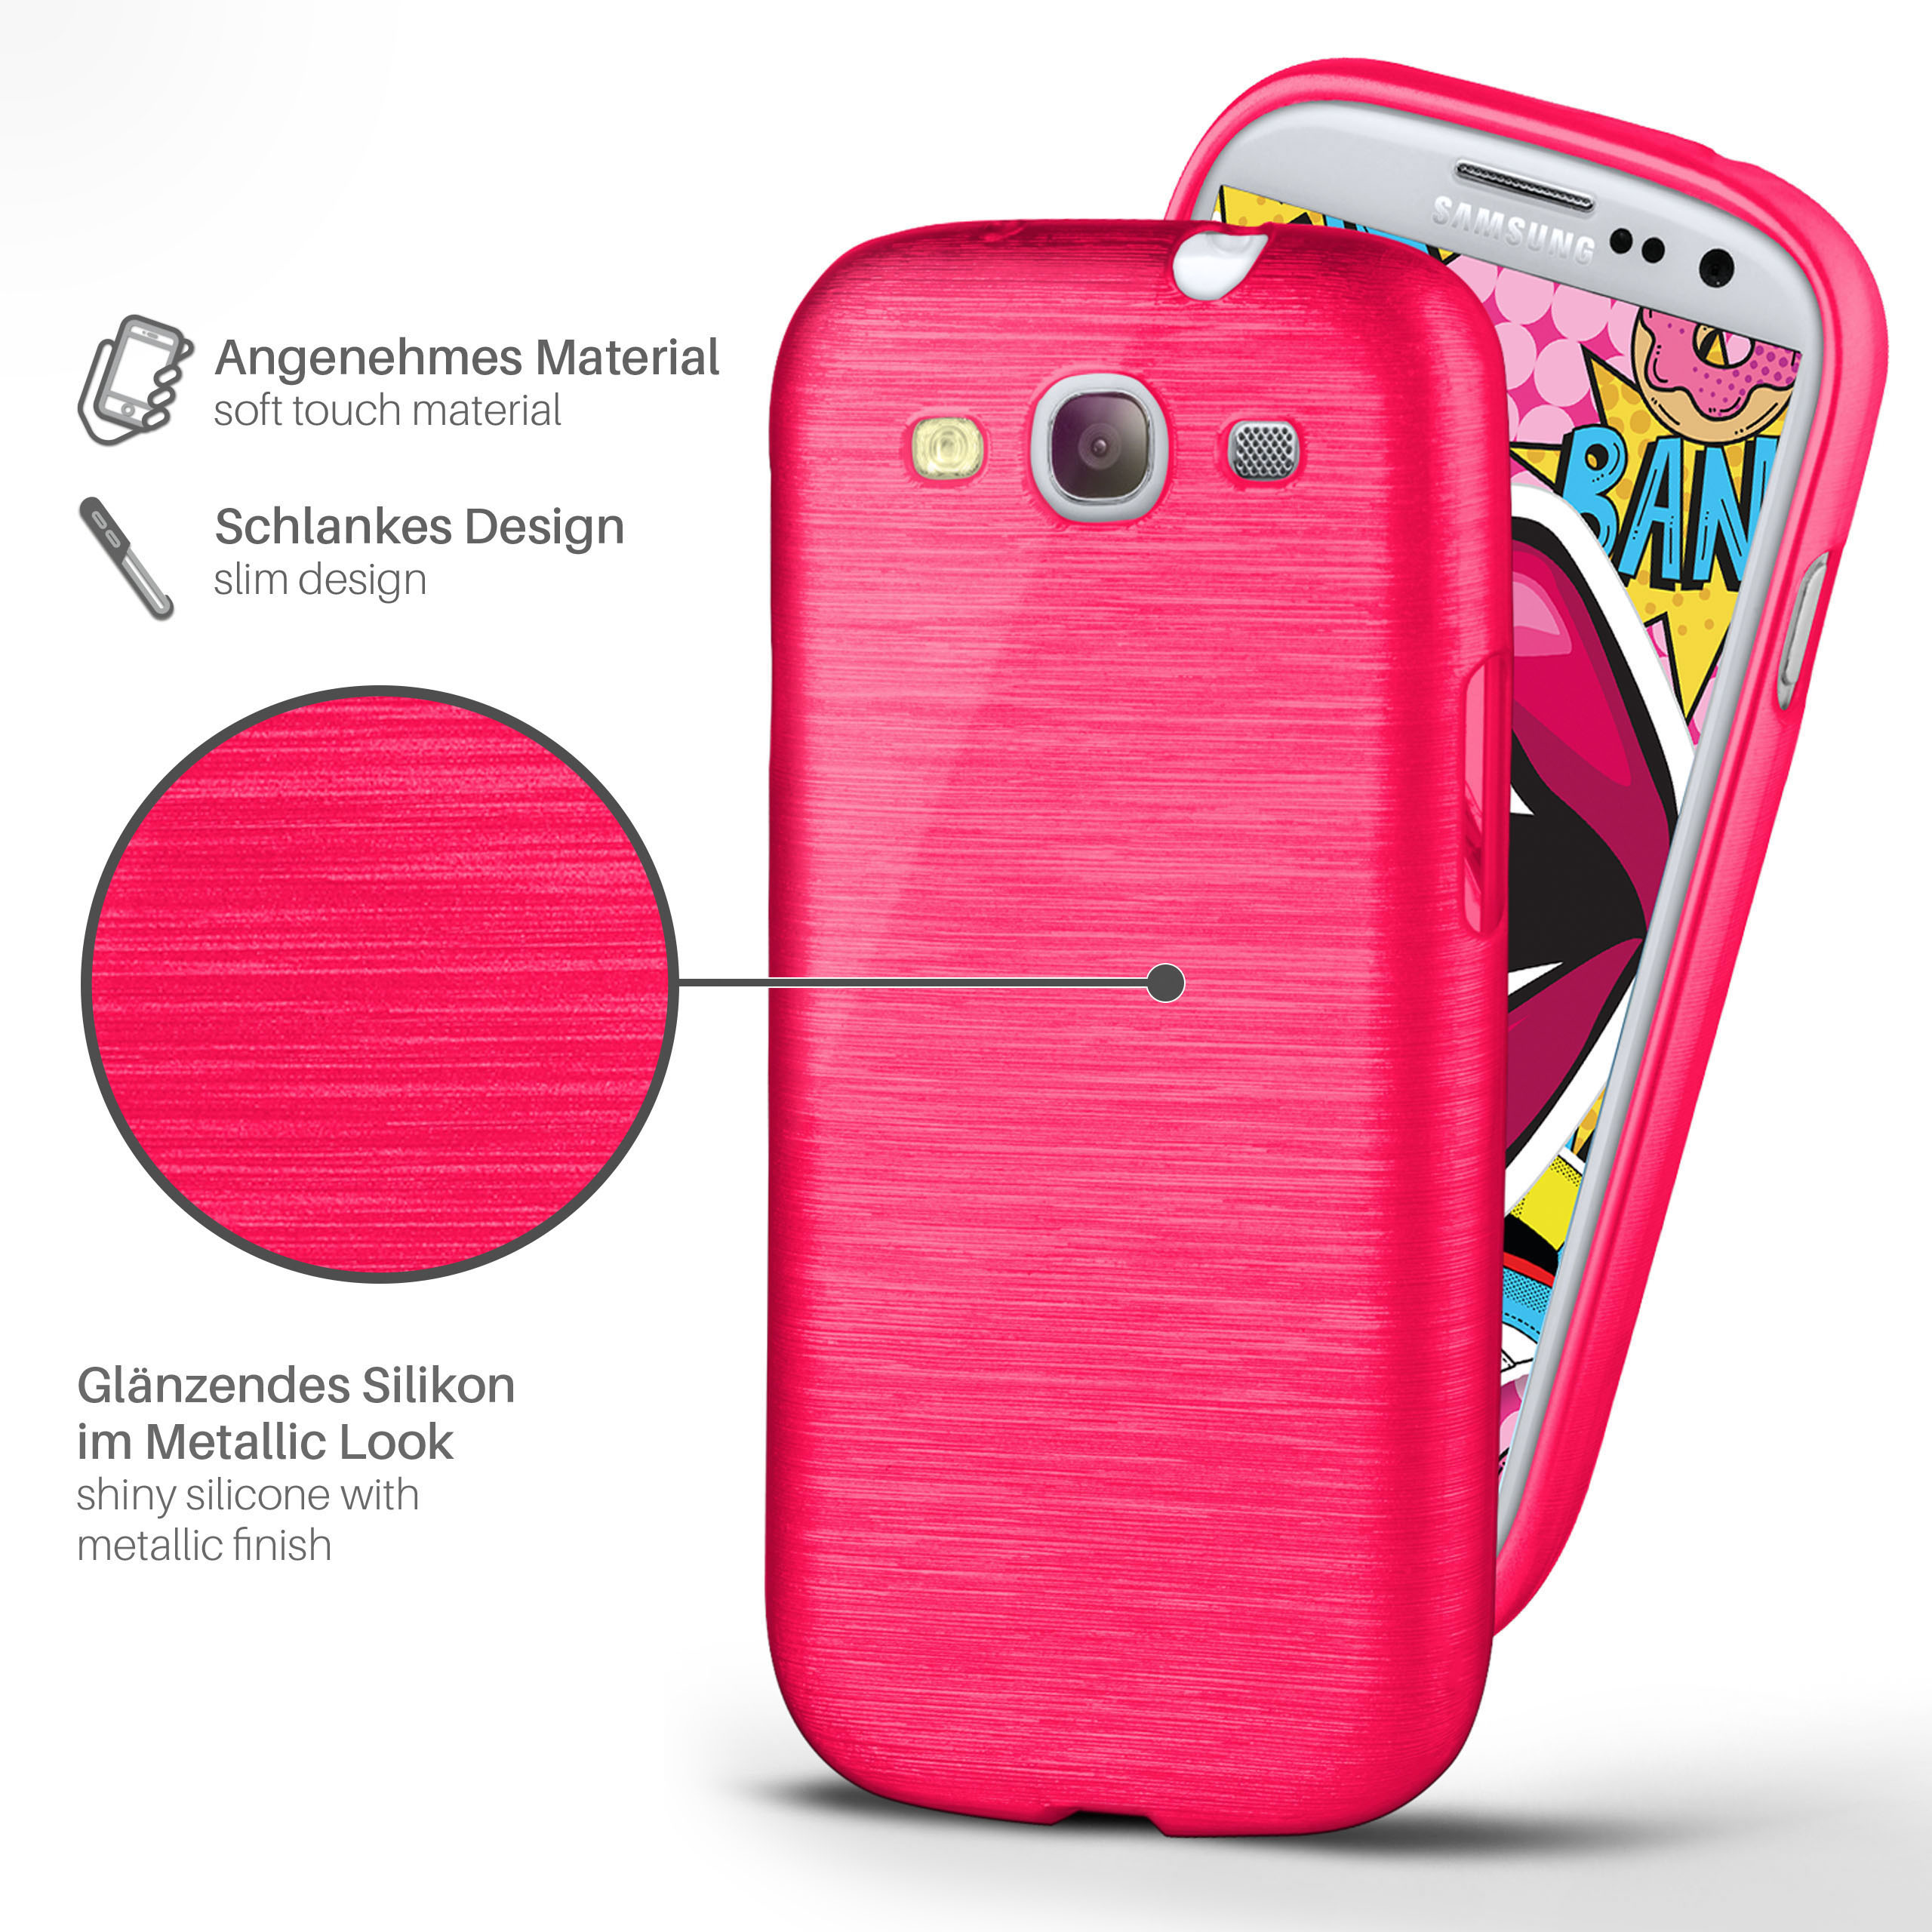 Samsung, Brushed S3 Backcover, Magenta-Pink / MOEX Neo, S3 Galaxy Case,